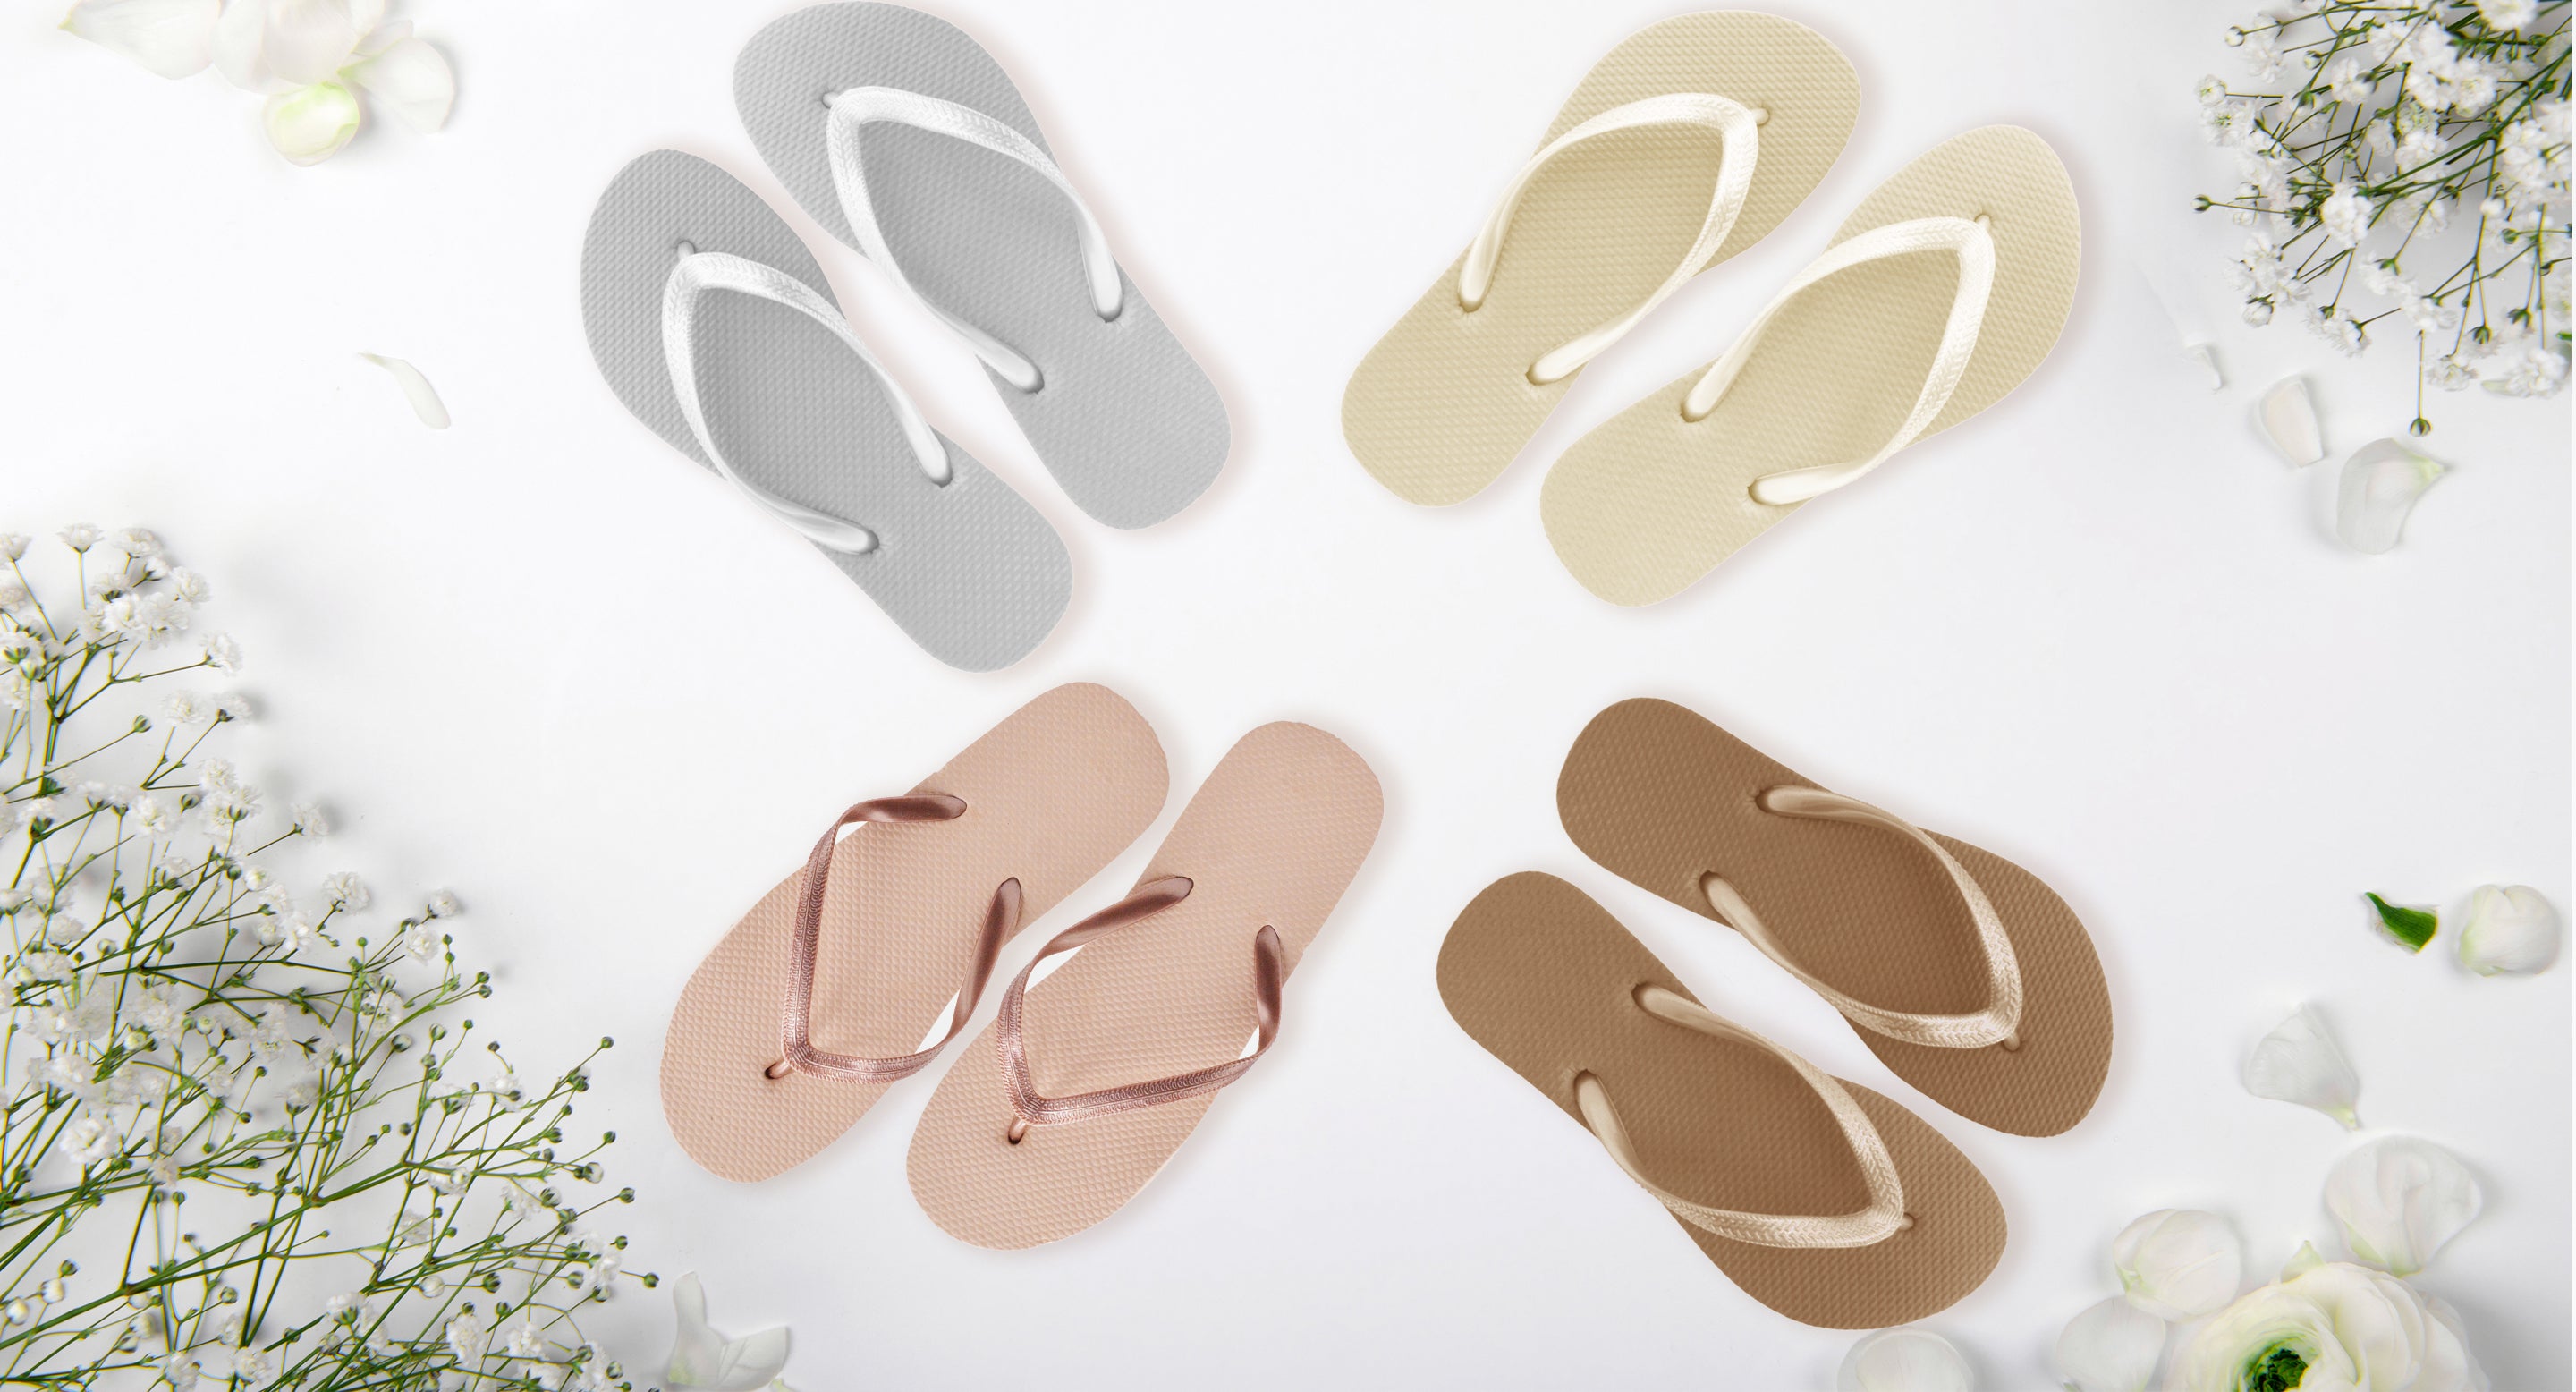 Trail maker 50 Pairs Bulk Flip Flops for Women Wedding Guests, Bnb Guests,  Hotels, Pedicure Parties, and Charity Donation